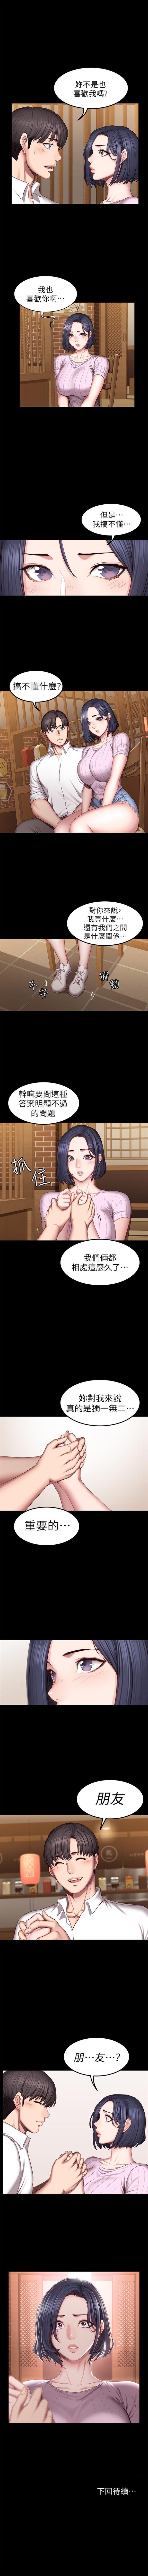 Polla 健身教練 1-48 官方中文（連載中） Gayemo - Page 298